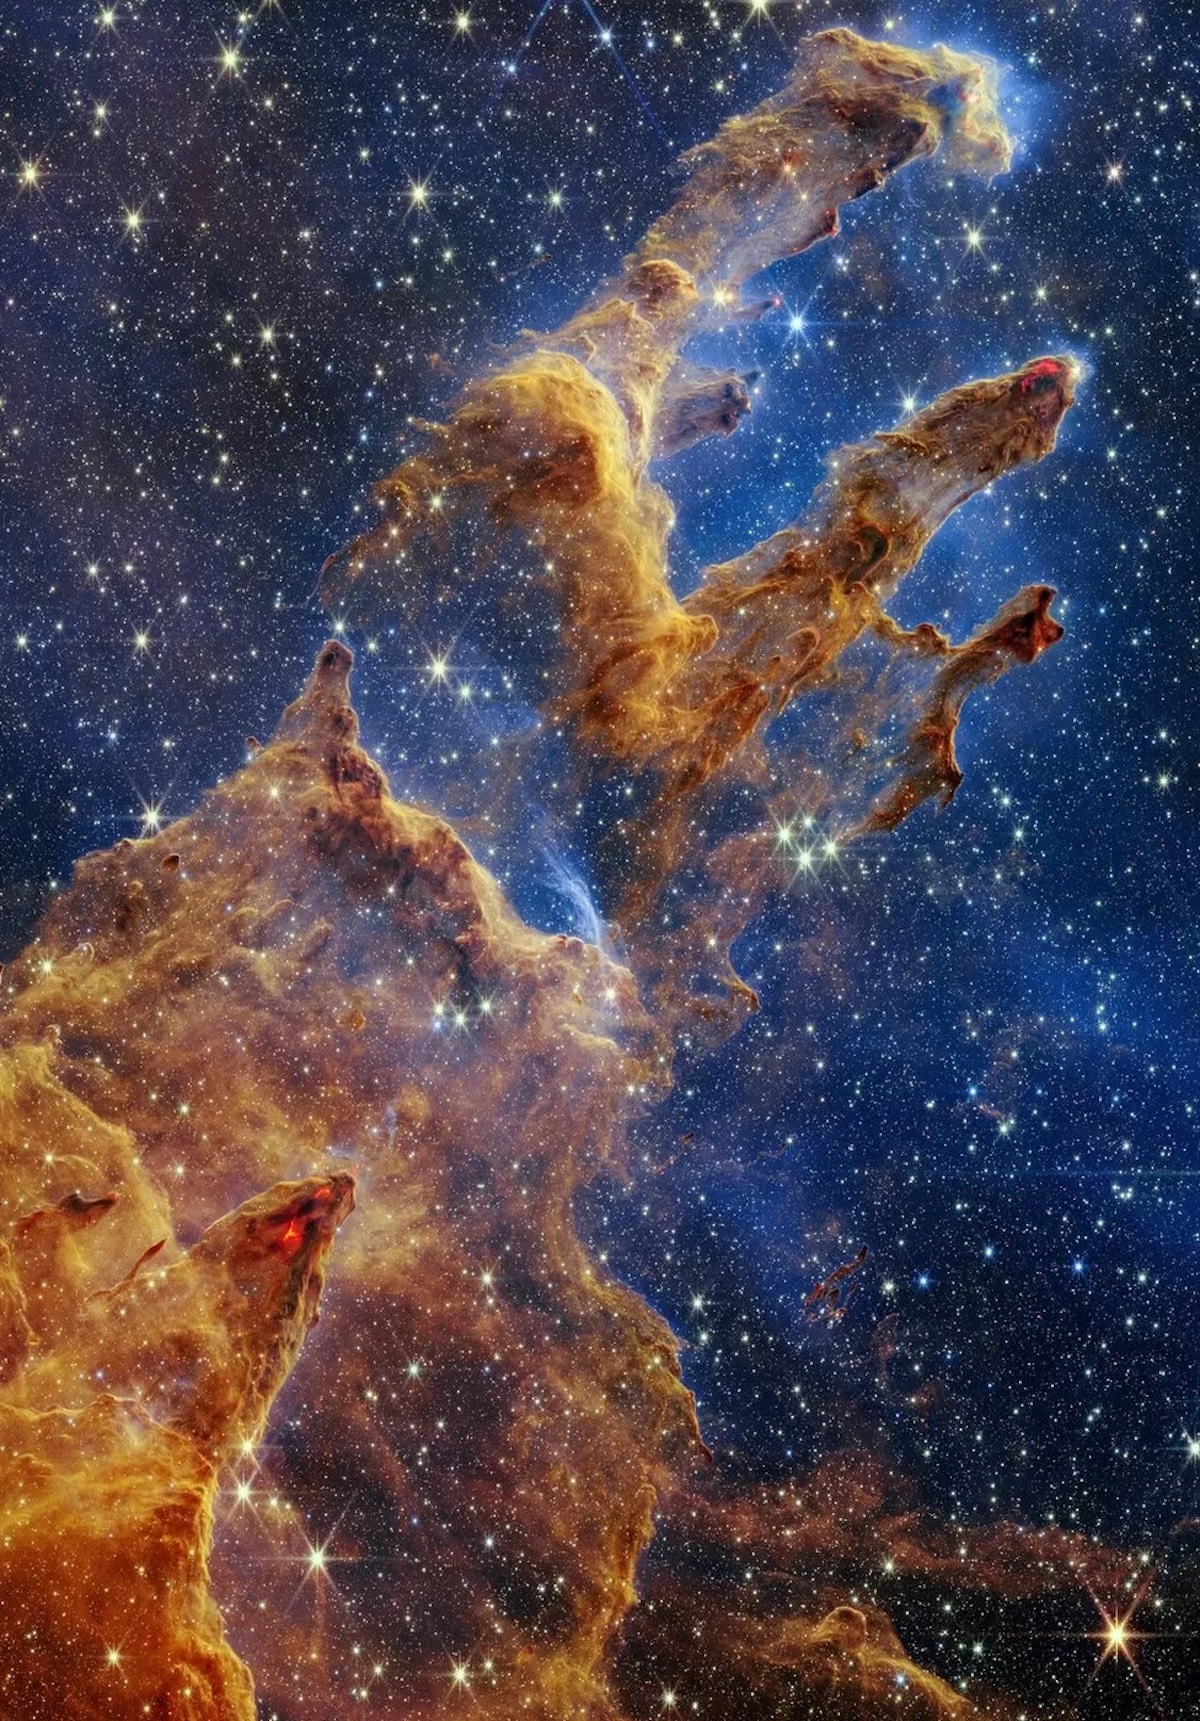 Pillars of Creation Captured by James Webb Space Telescope